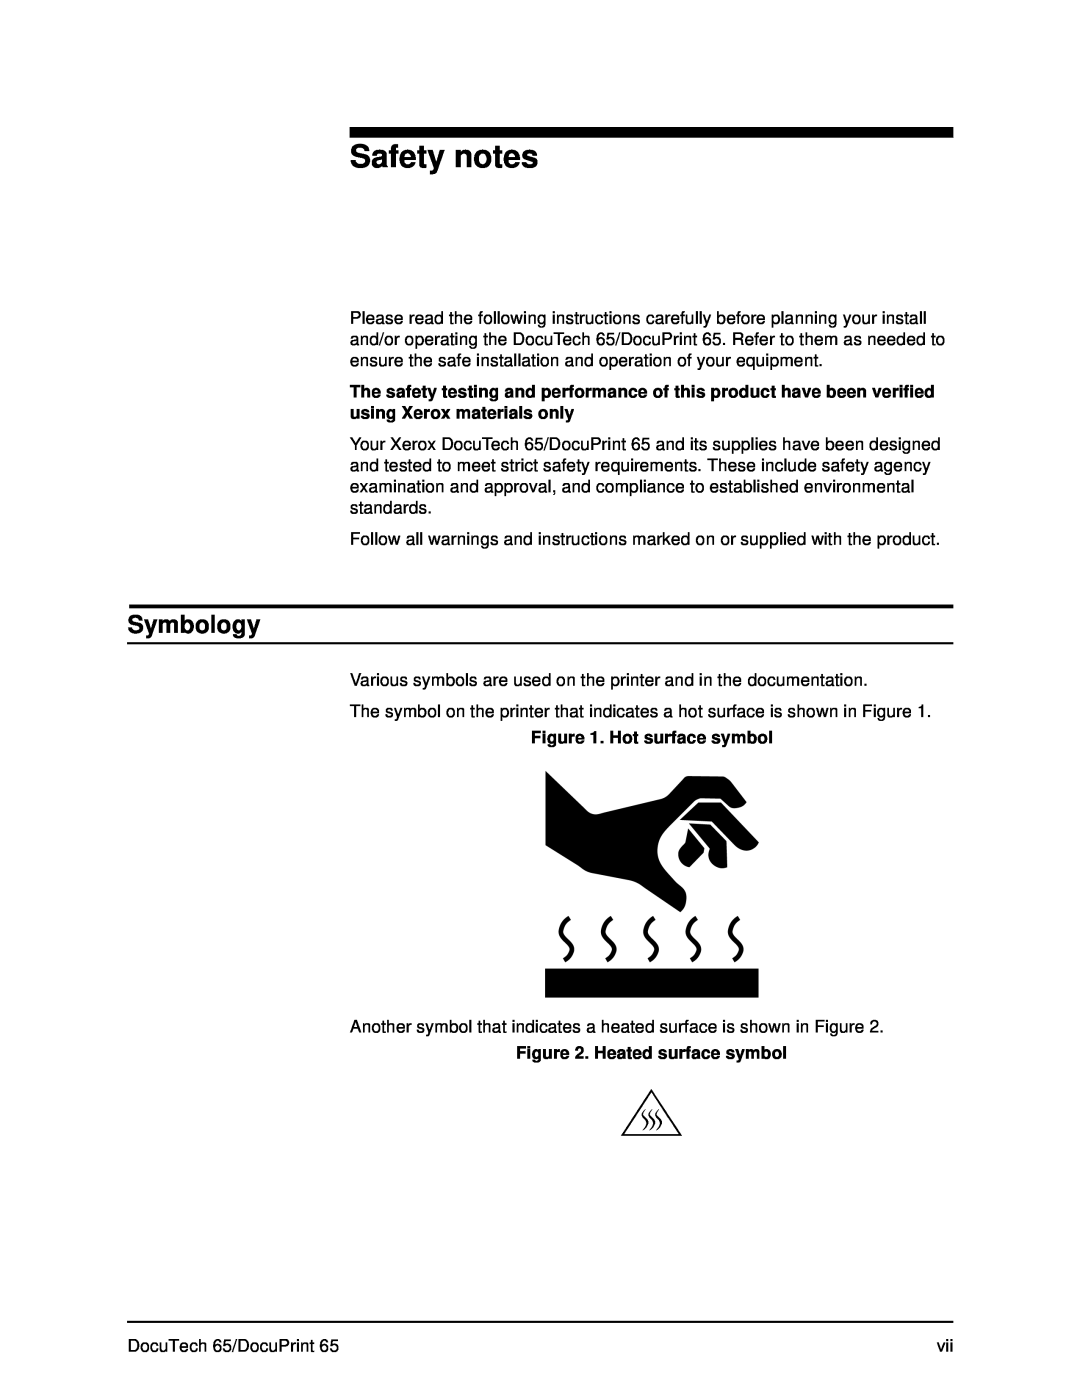 Xerox DOCUTECH 65 manual Safety notes, Symbology, Hot surface symbol, Heated surface symbol 